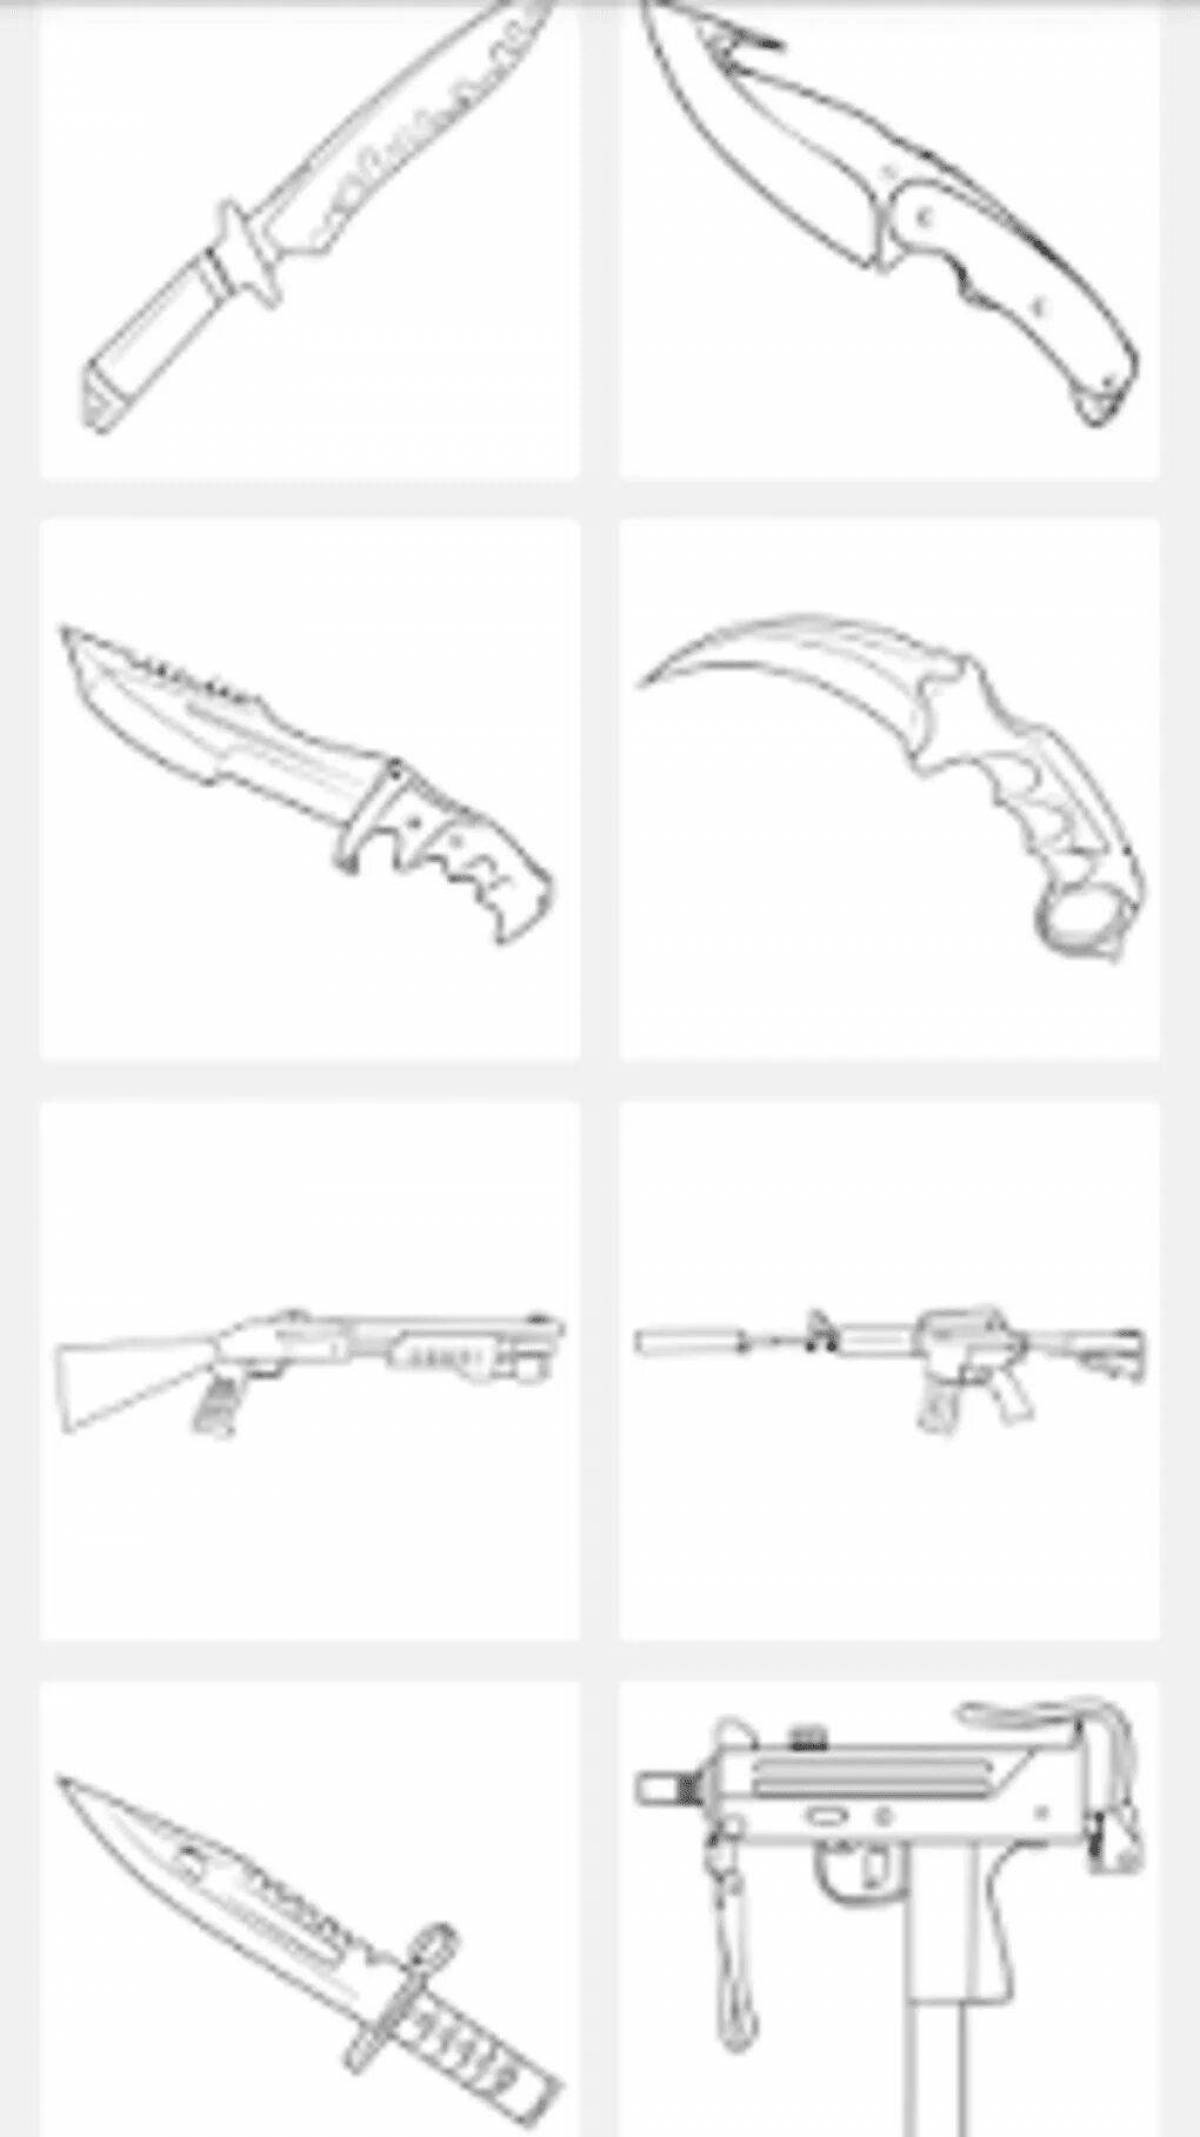 Detailed coloring page of the confrontation knives